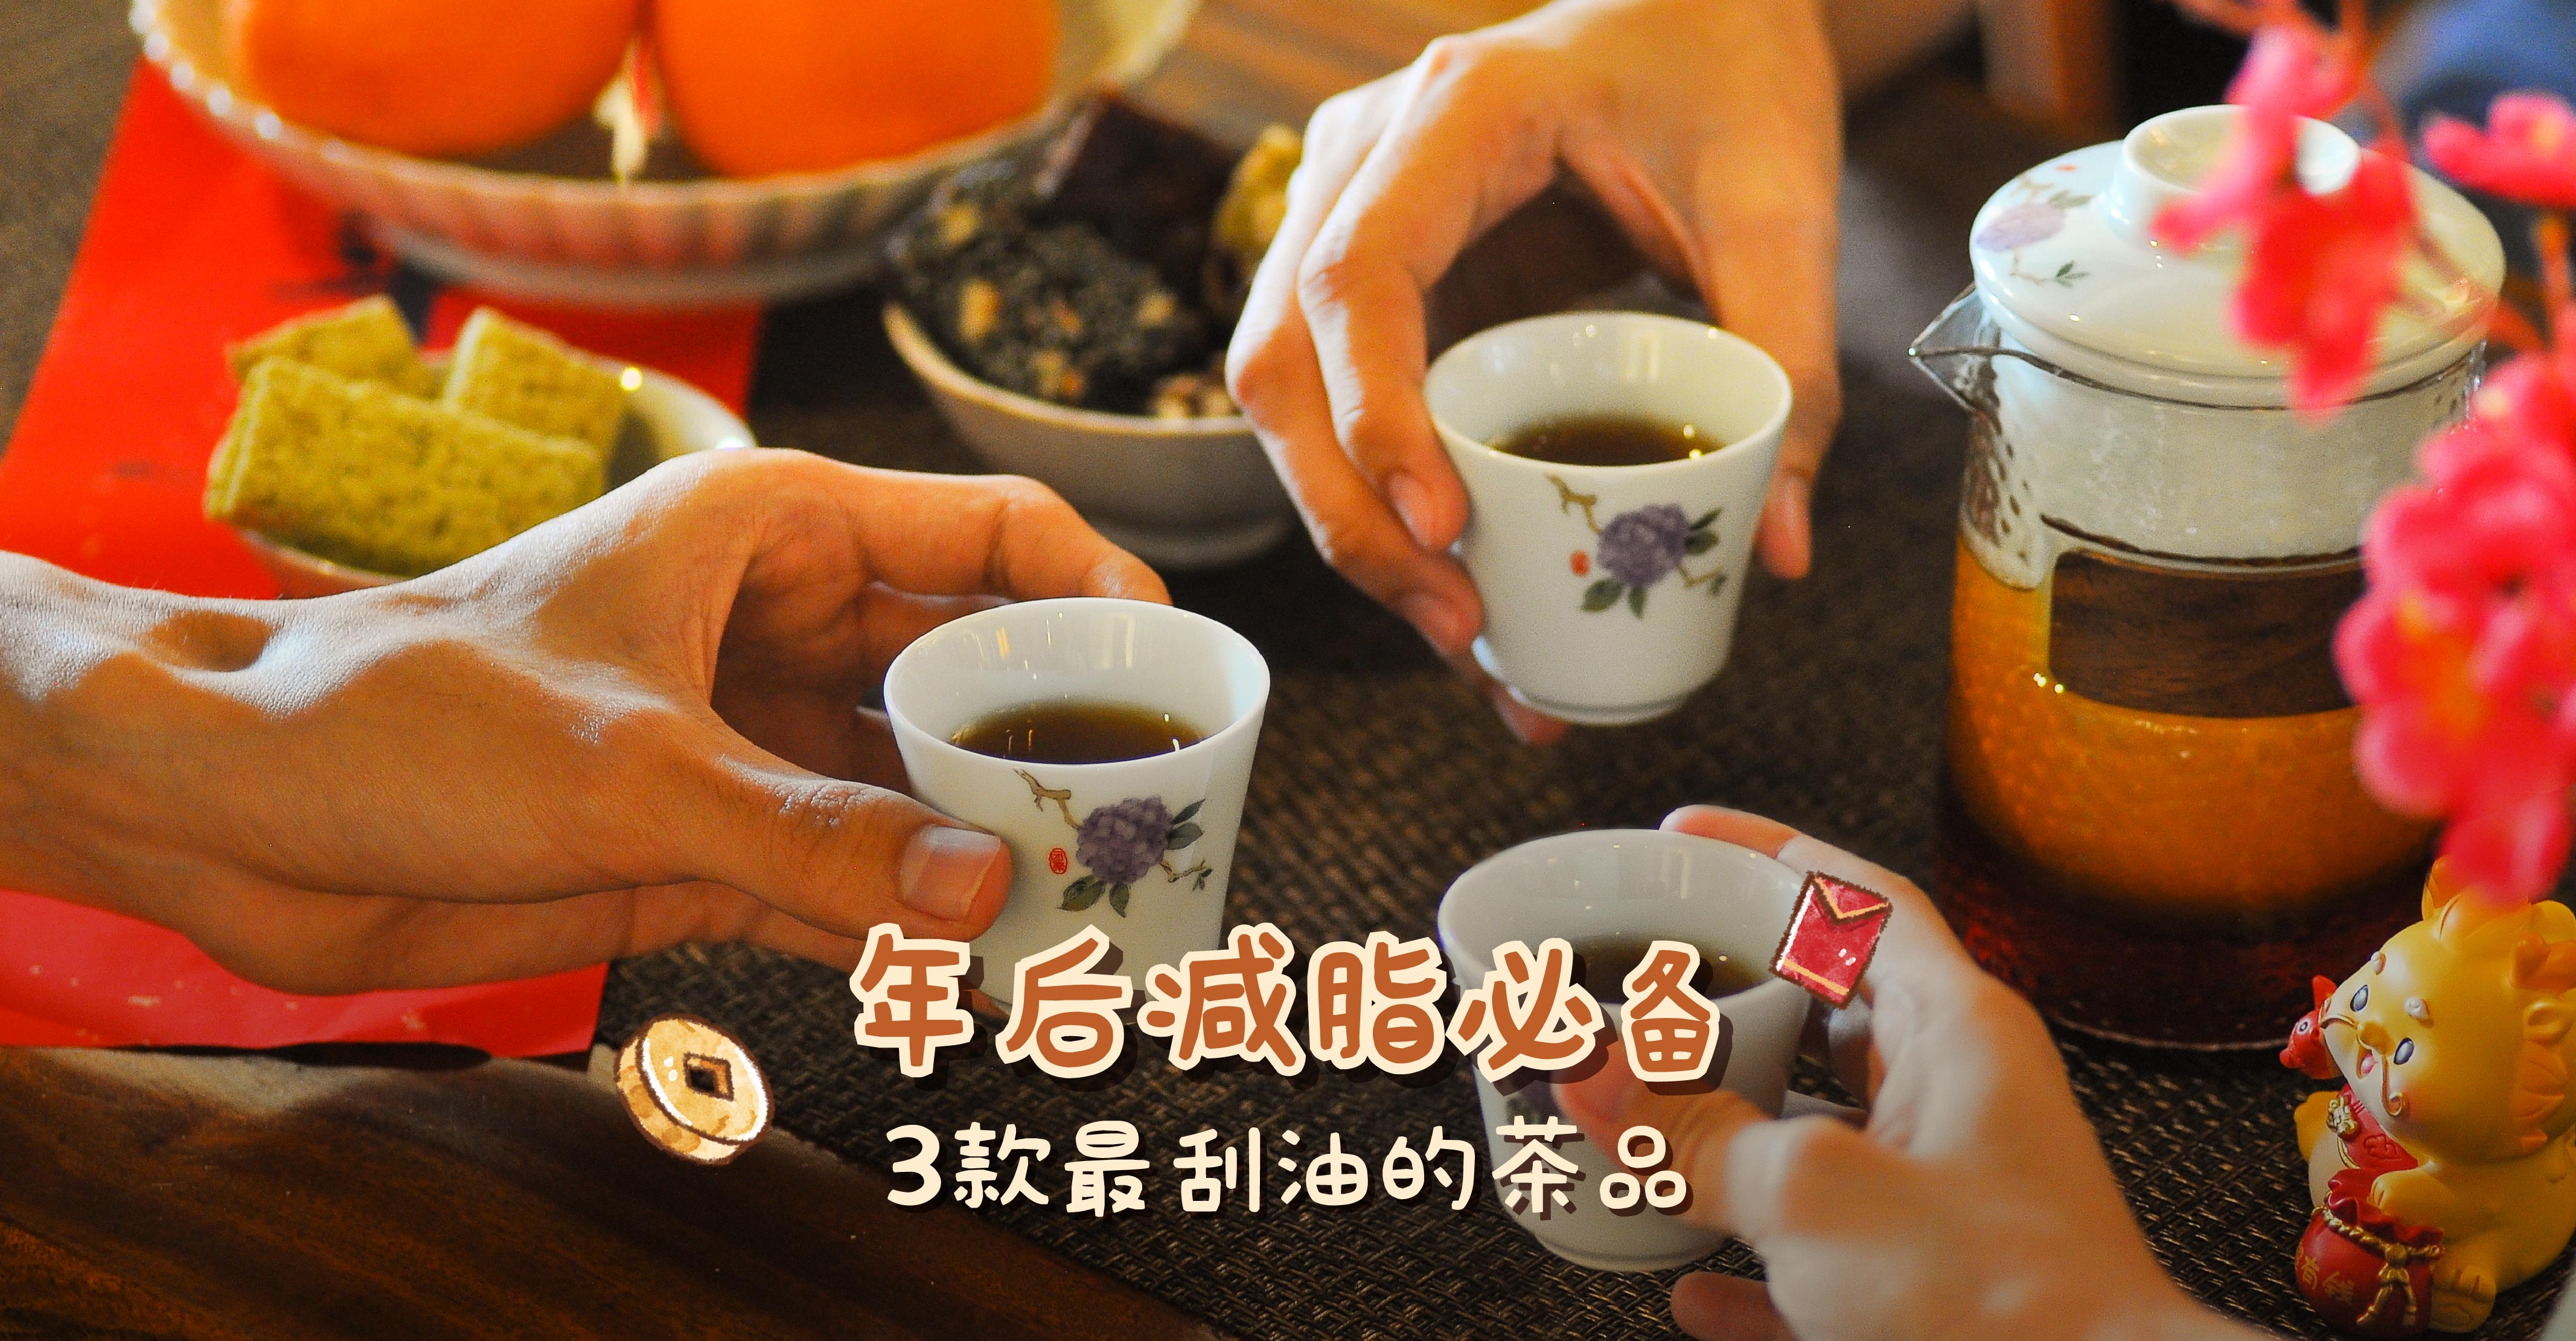 3 people gathering with holding teacups and tea snacks beside